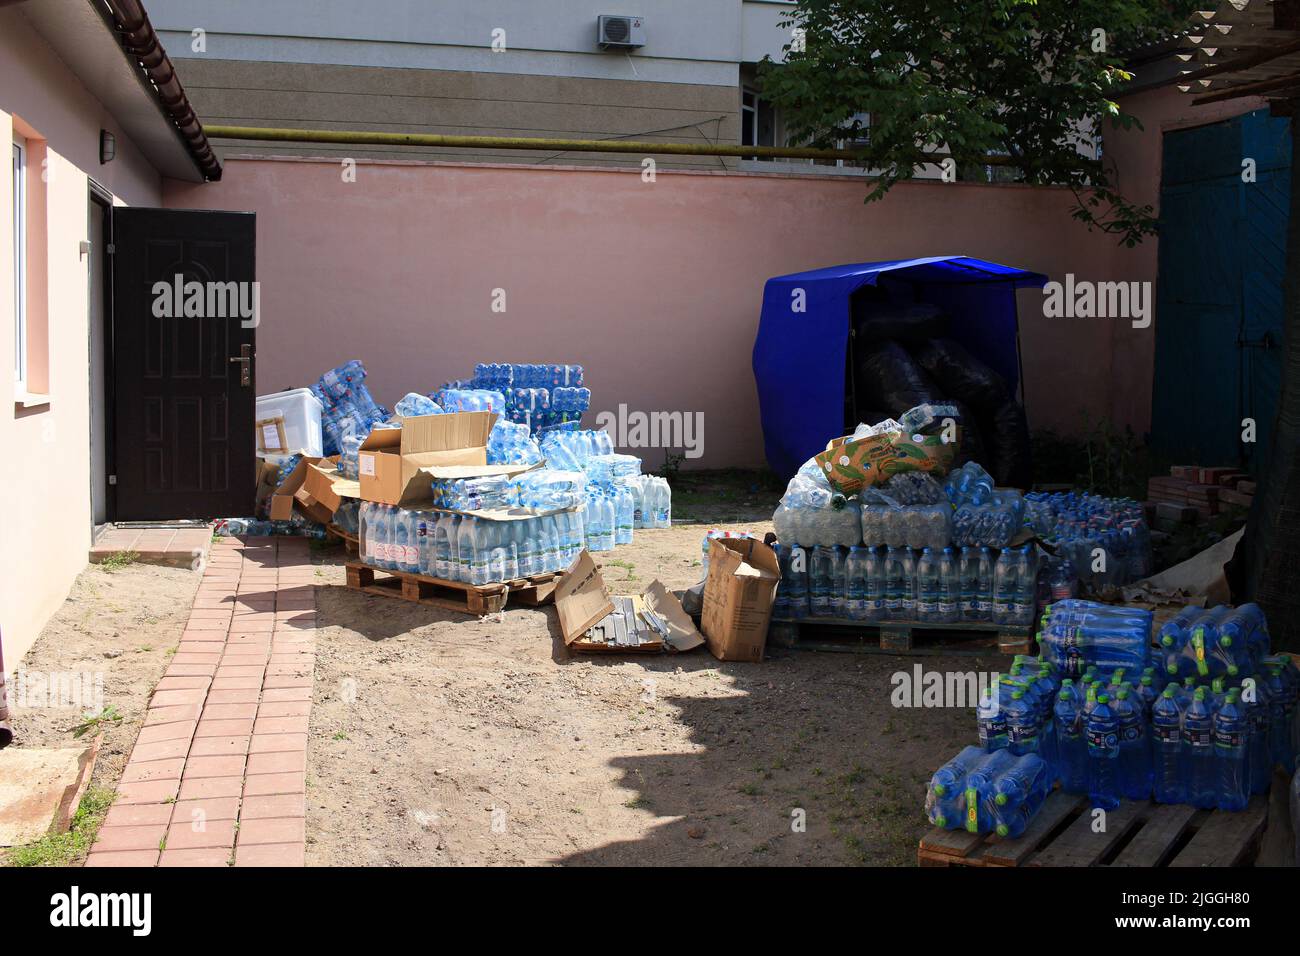 A large number of water bottles is seen on the street. Previously, the building was used for extracurricular education of children in creativity and biology. Since the beginning of the war between Russia and Ukraine, a volunteer center has been operating in these premises, dealing with the distribution of humanitarian aid from EU. Stock Photo